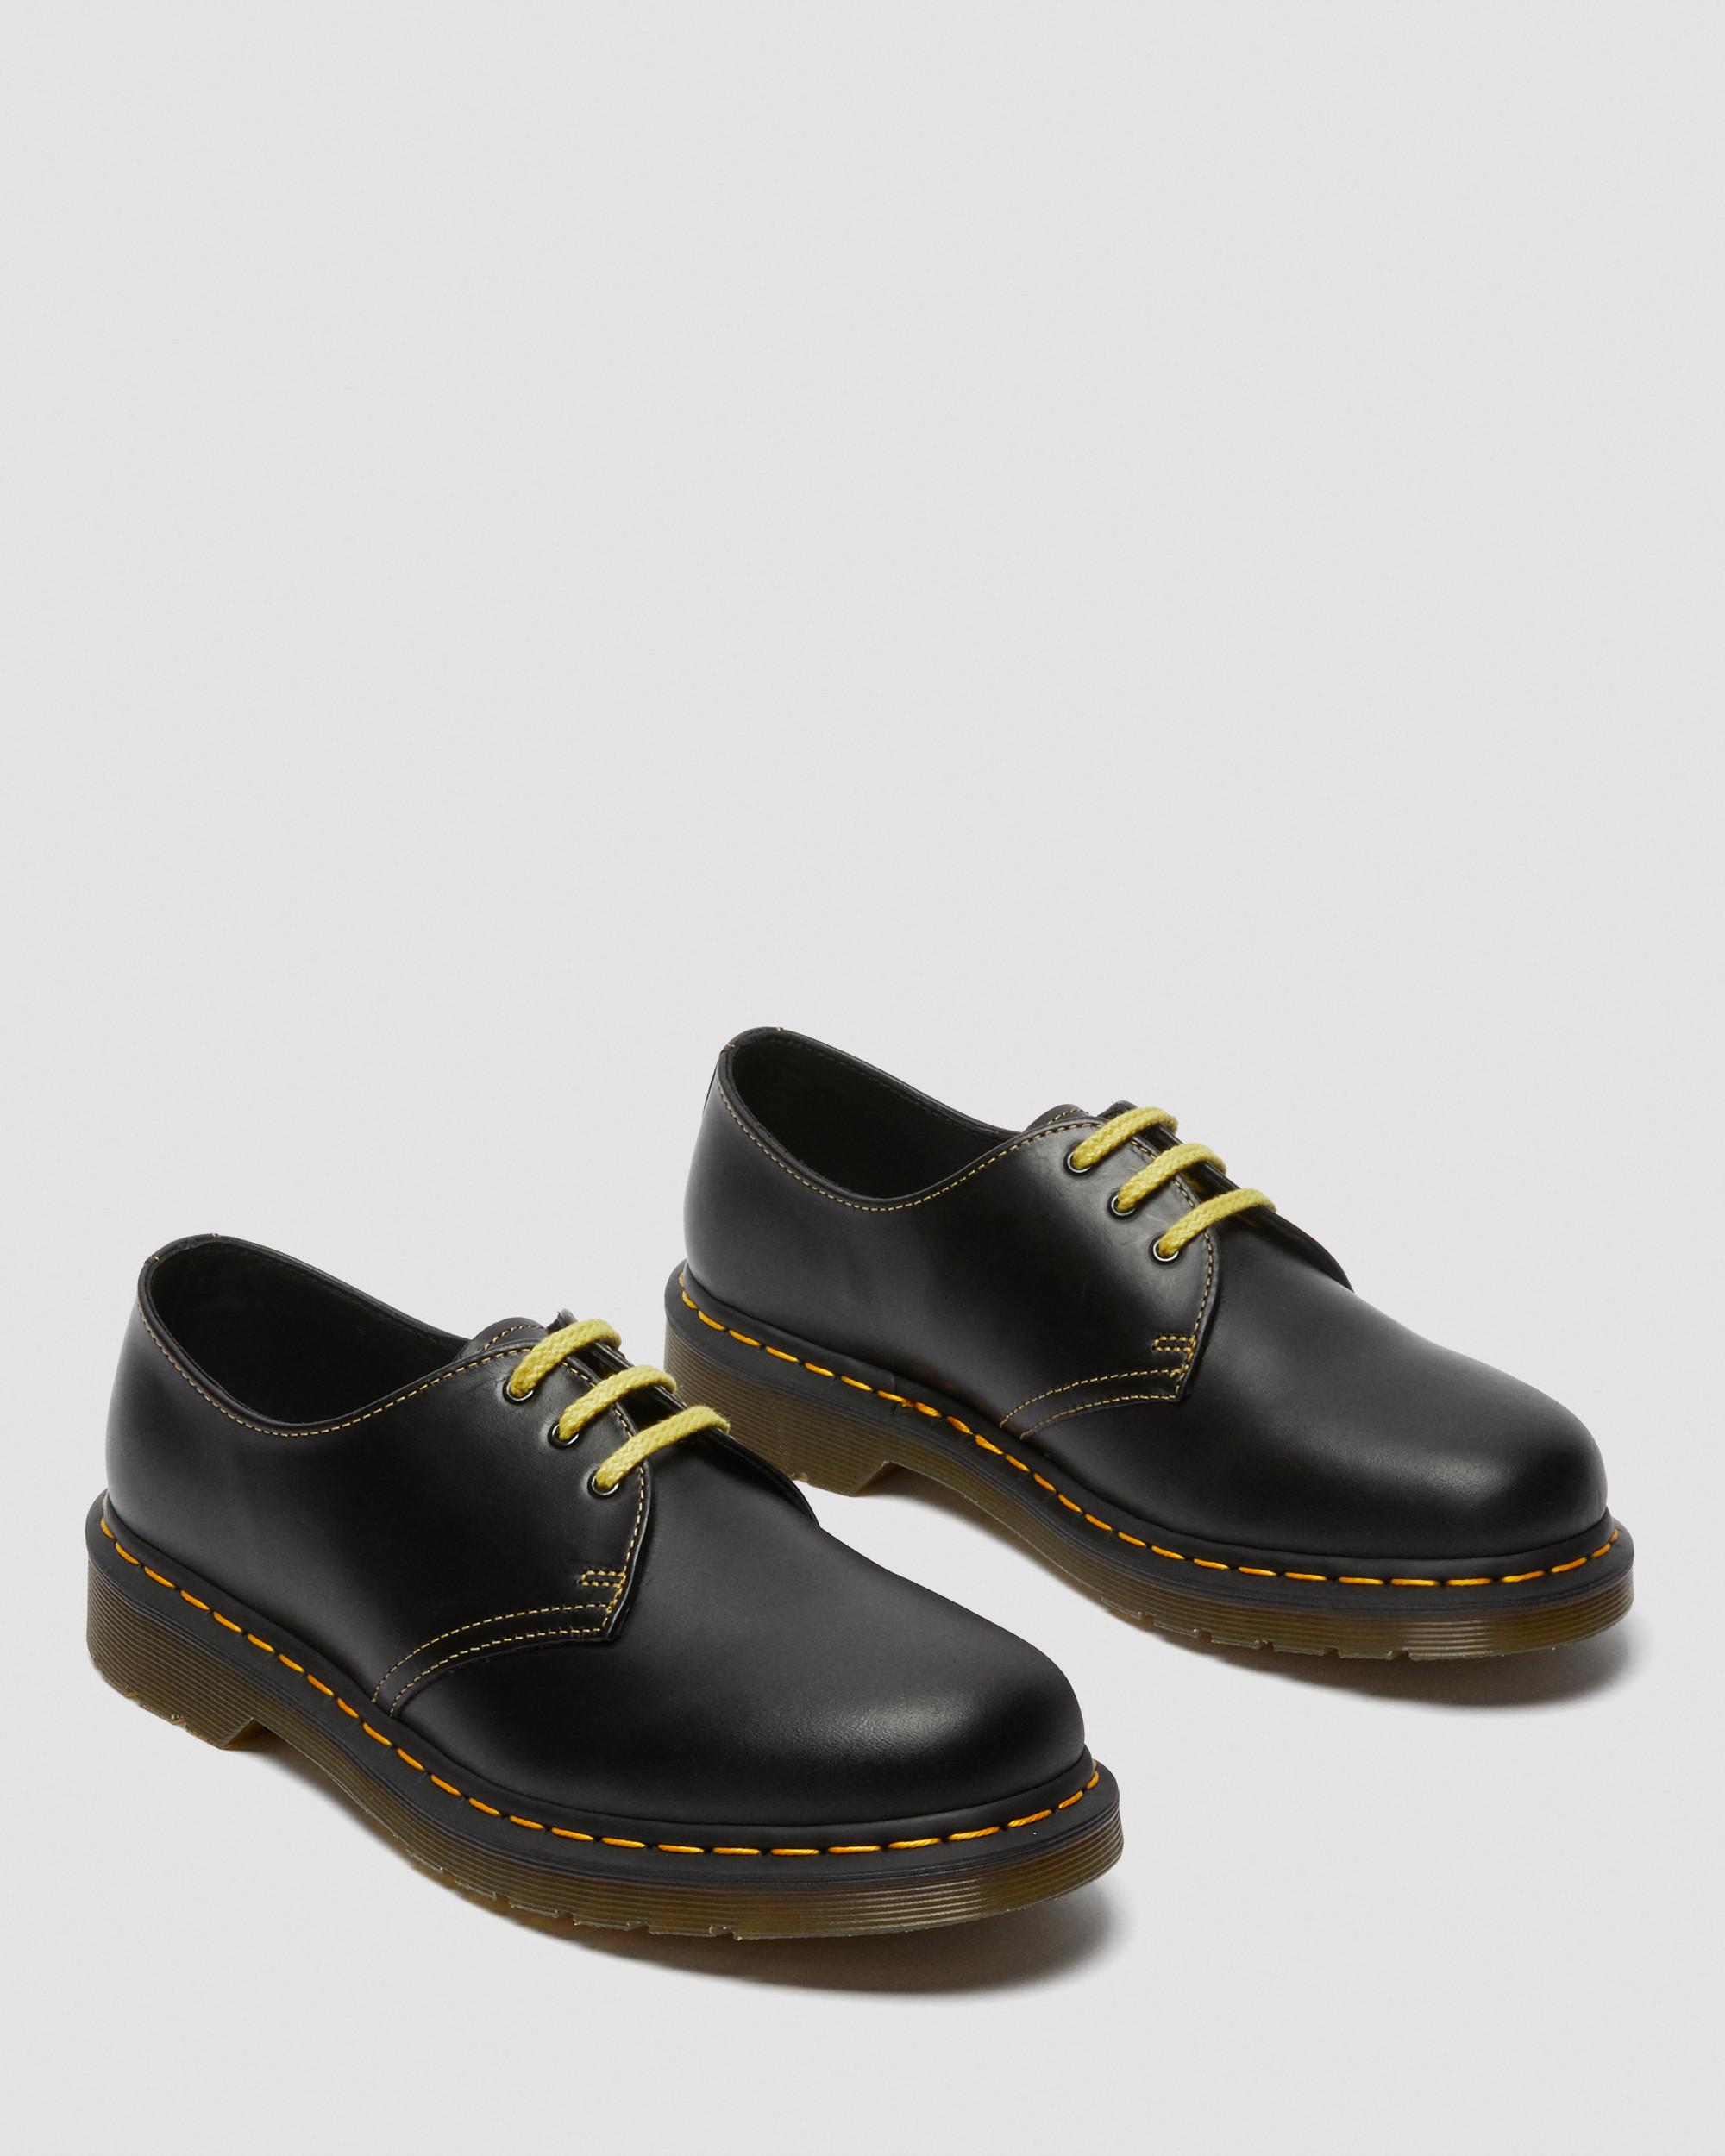 1461 Atlas Leather Oxford Shoes in Dark Grey | Dr. Martens